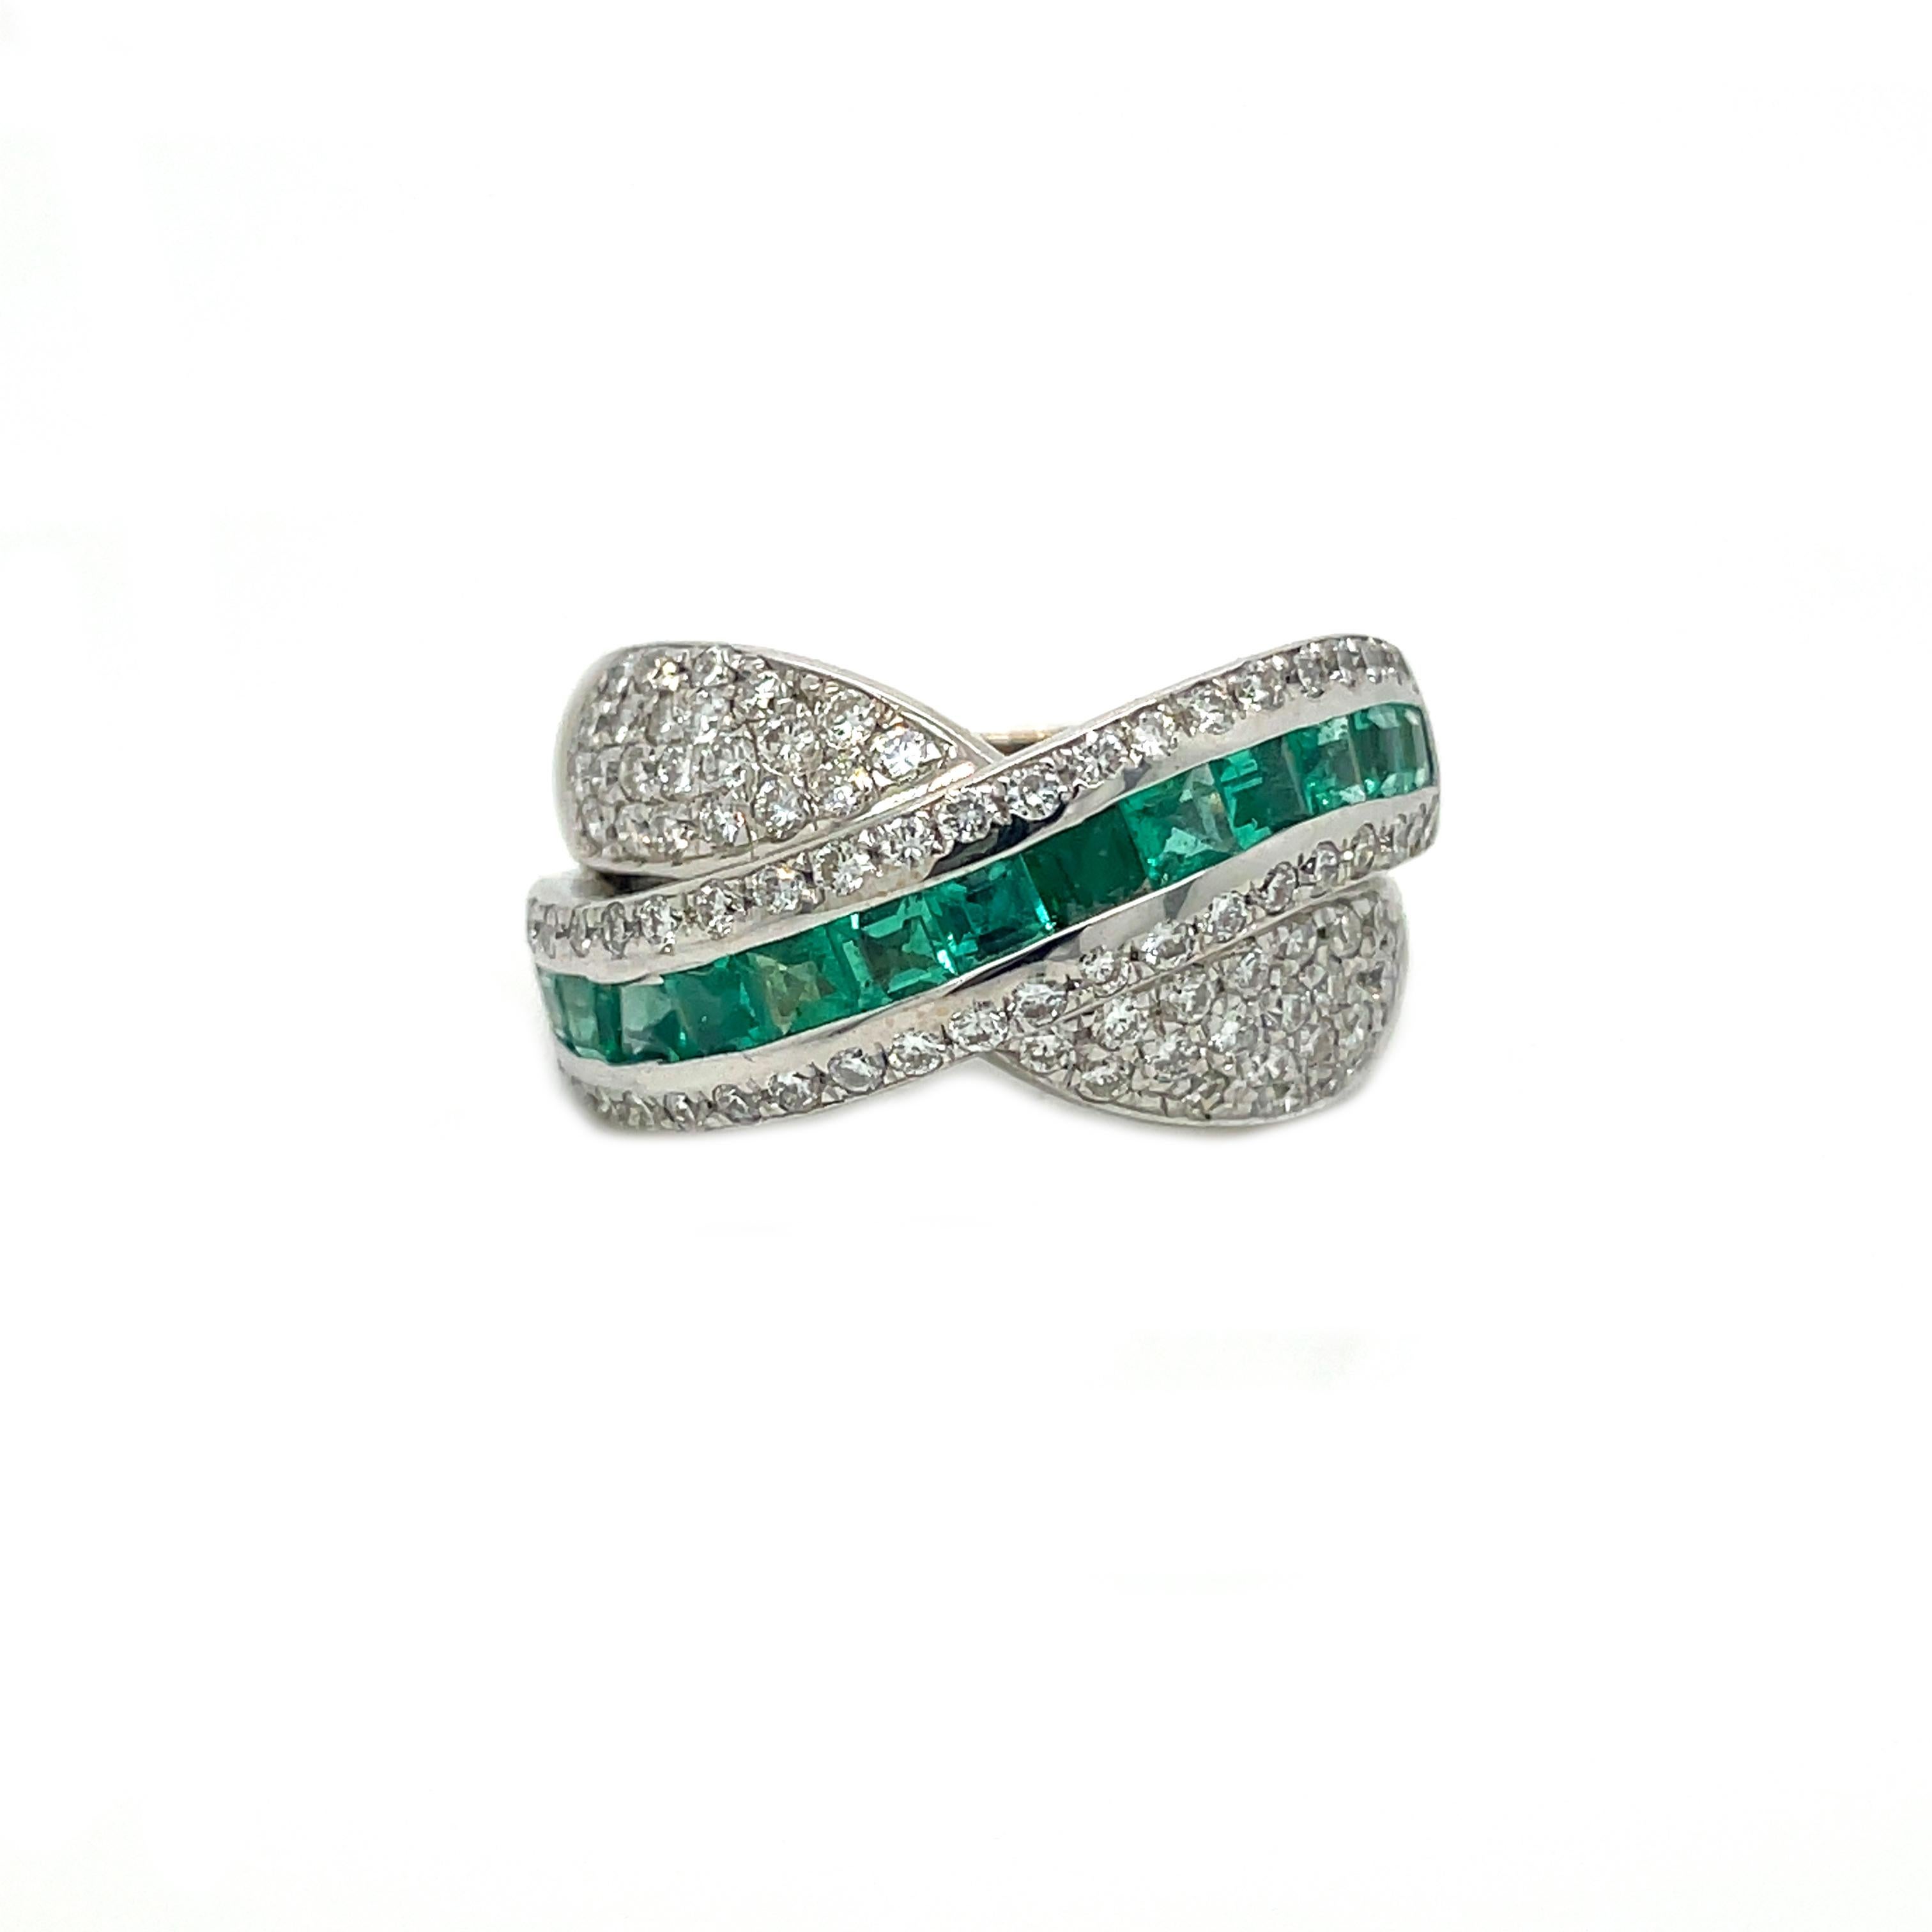 This is a breathtaking Contemporary ring that features gorgeous vivid green emeralds and bright white diamonds in a beautiful crossover design. There is no doubt that this ring will be seen from tables away! This is the perfect ring for someone